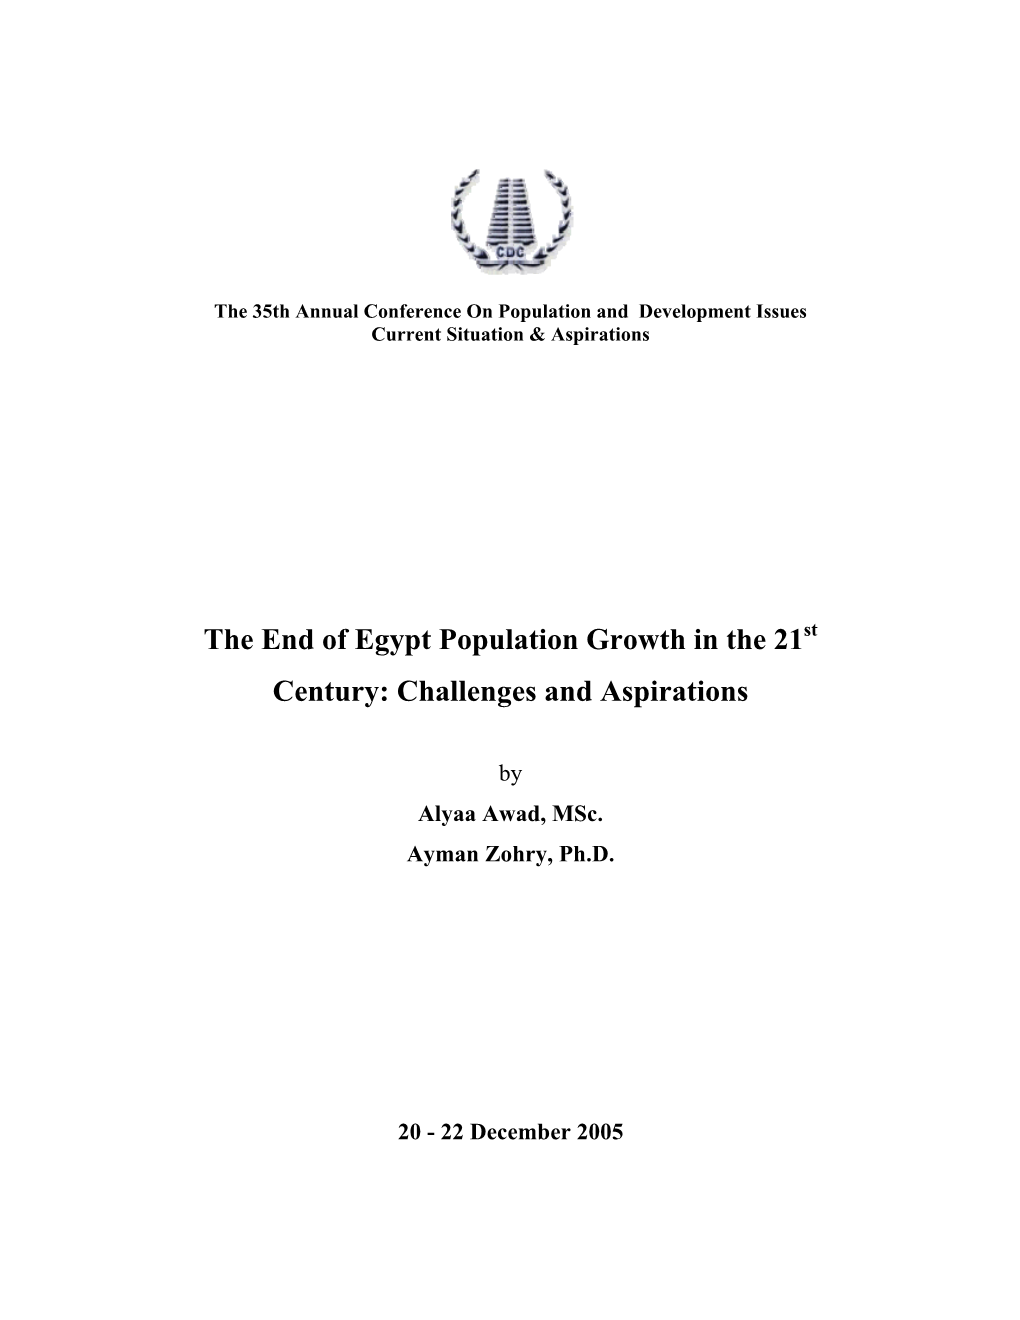 The End of Egypt Population Growth in the 21 Century